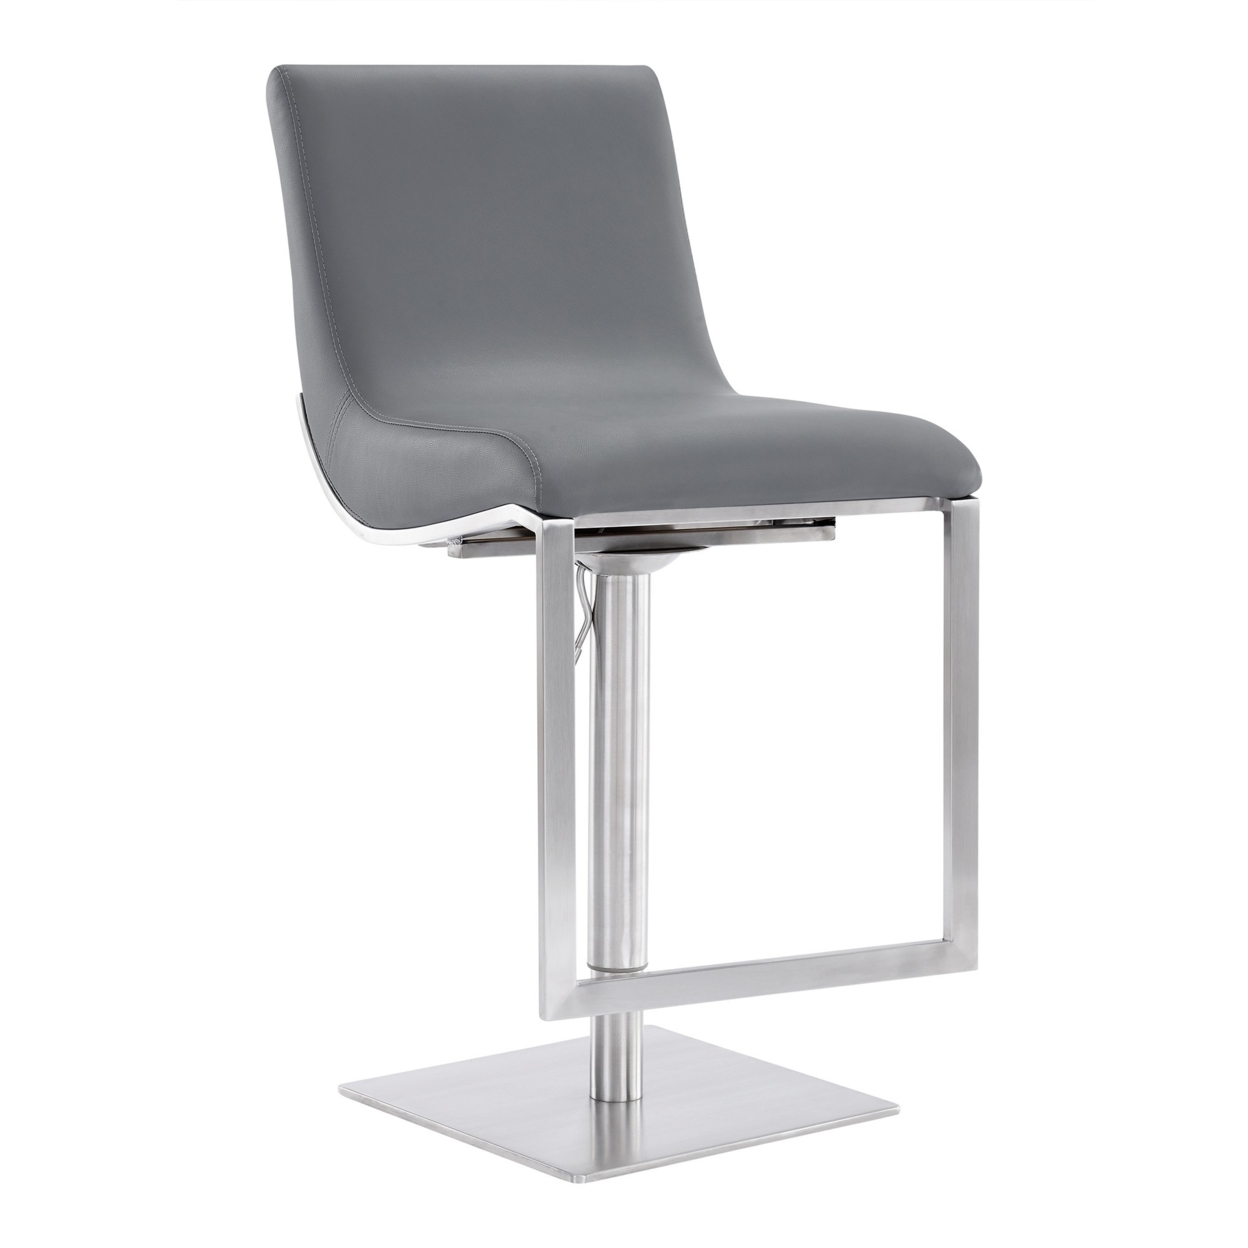 Curved Leatherette Barstool With Adjustable Height, Gray- Saltoro Sherpi